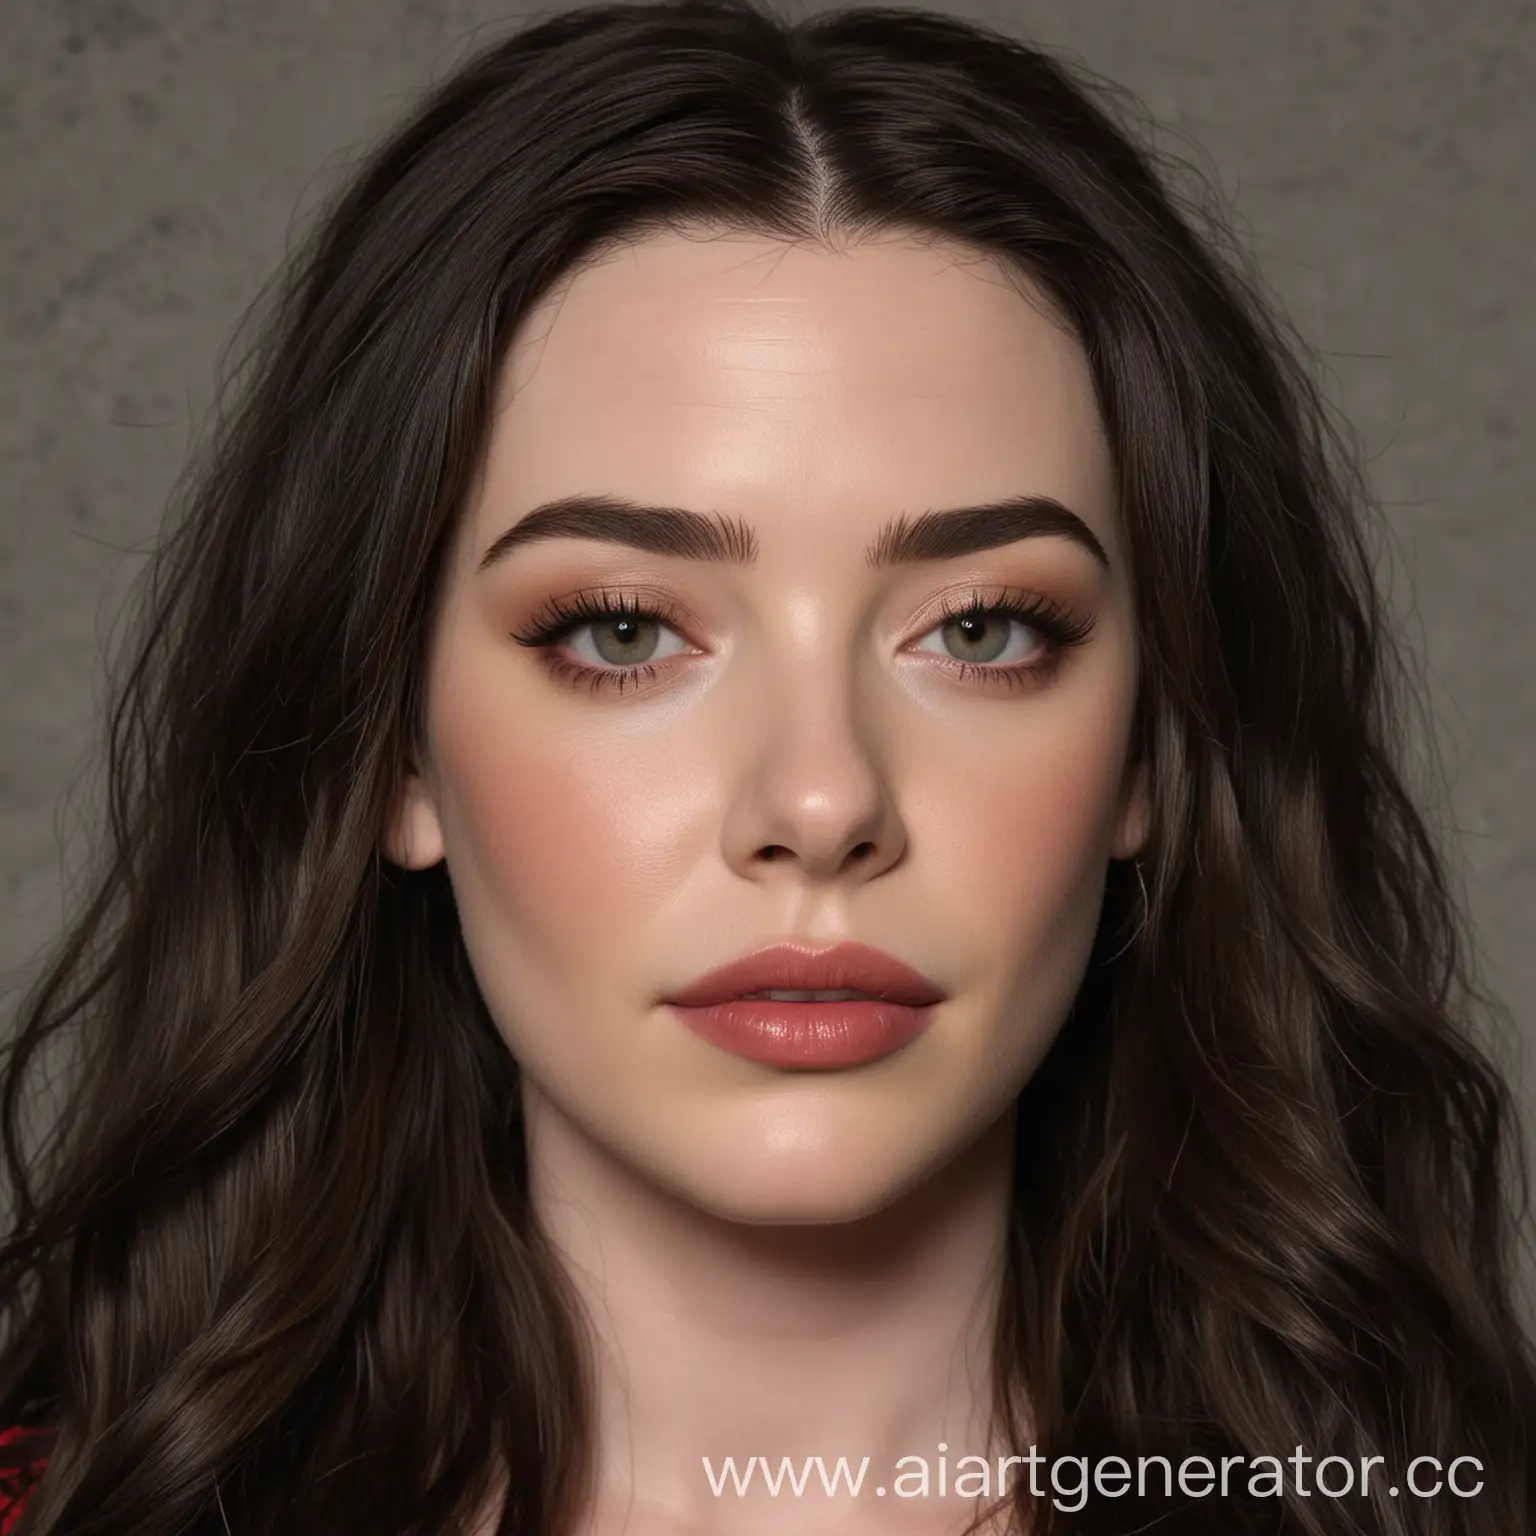 Portrait-of-a-Girl-with-Features-Resembling-Liv-Tyler-and-Sabrina-Carpenter